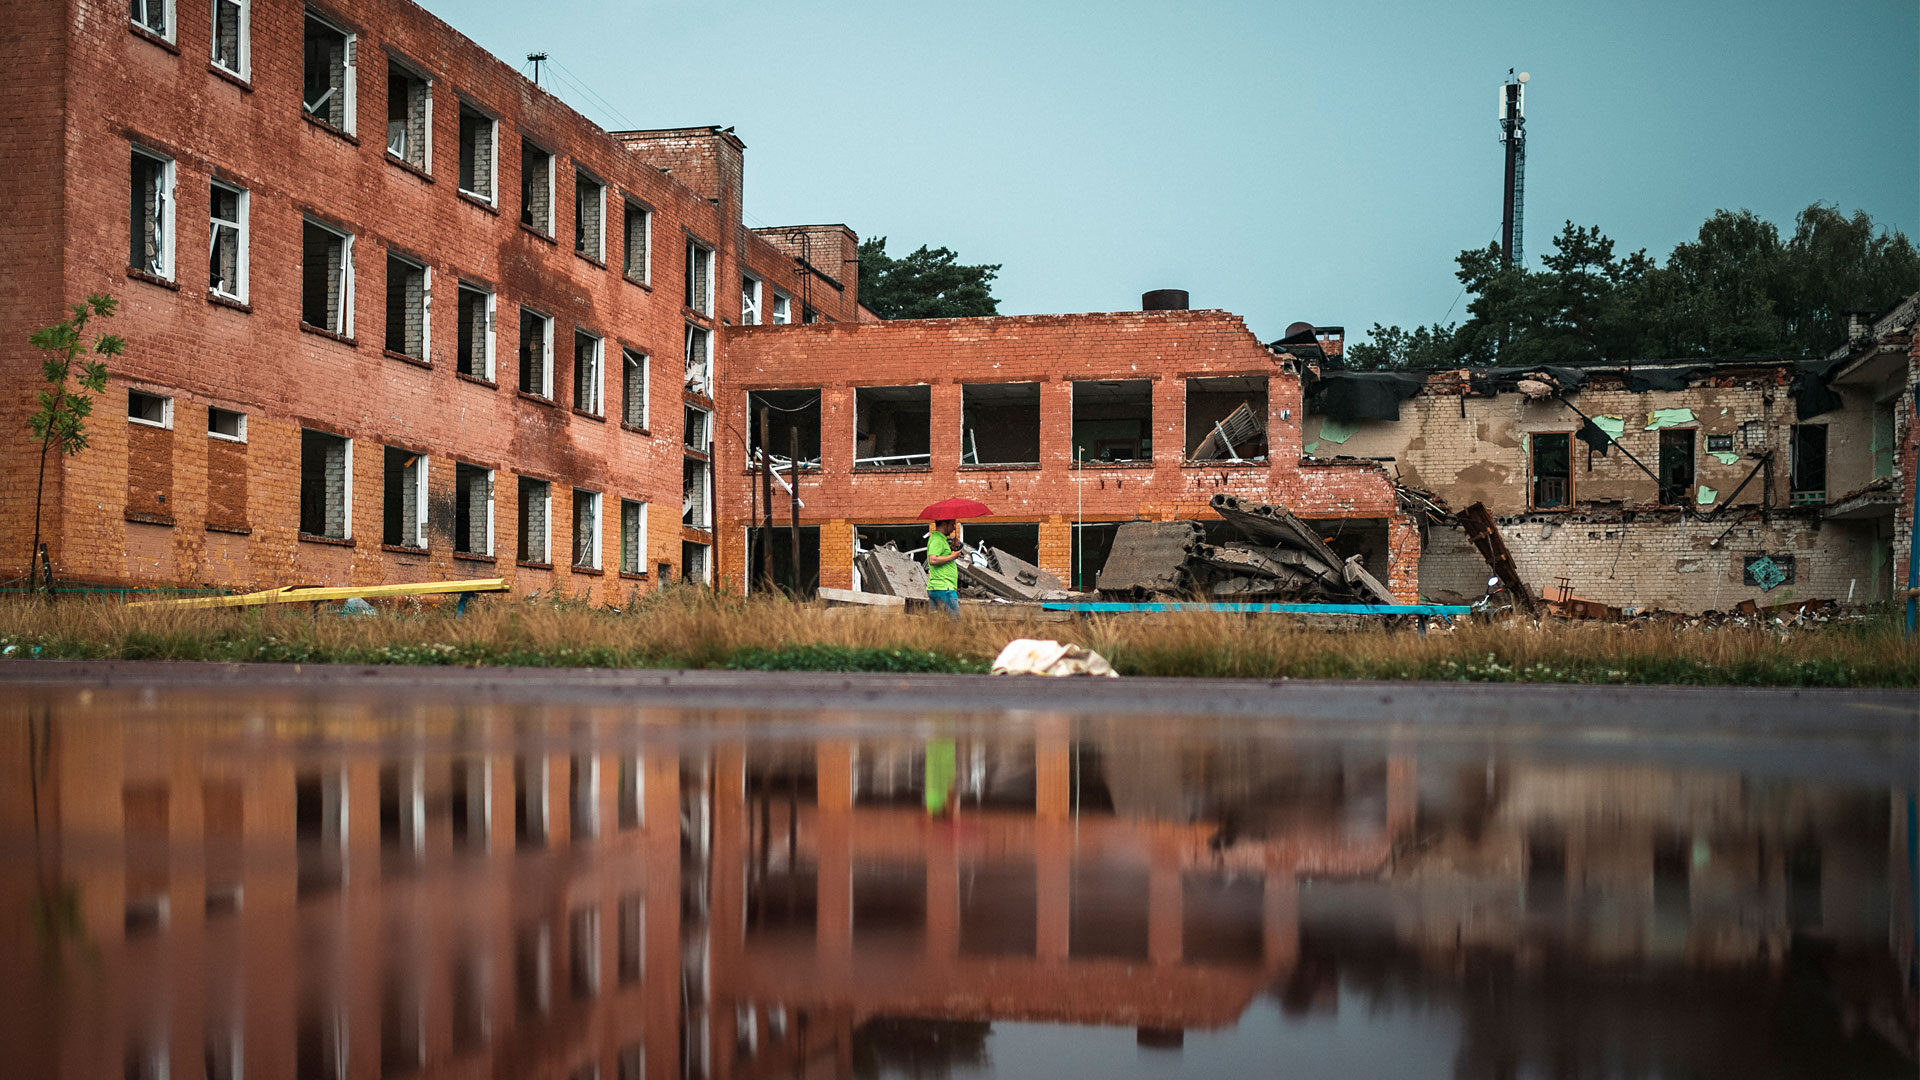 A destroyed school is depicted on the other side of a reflective pool of water. In front of a school a person in a green t shirt holds a red umbrella.